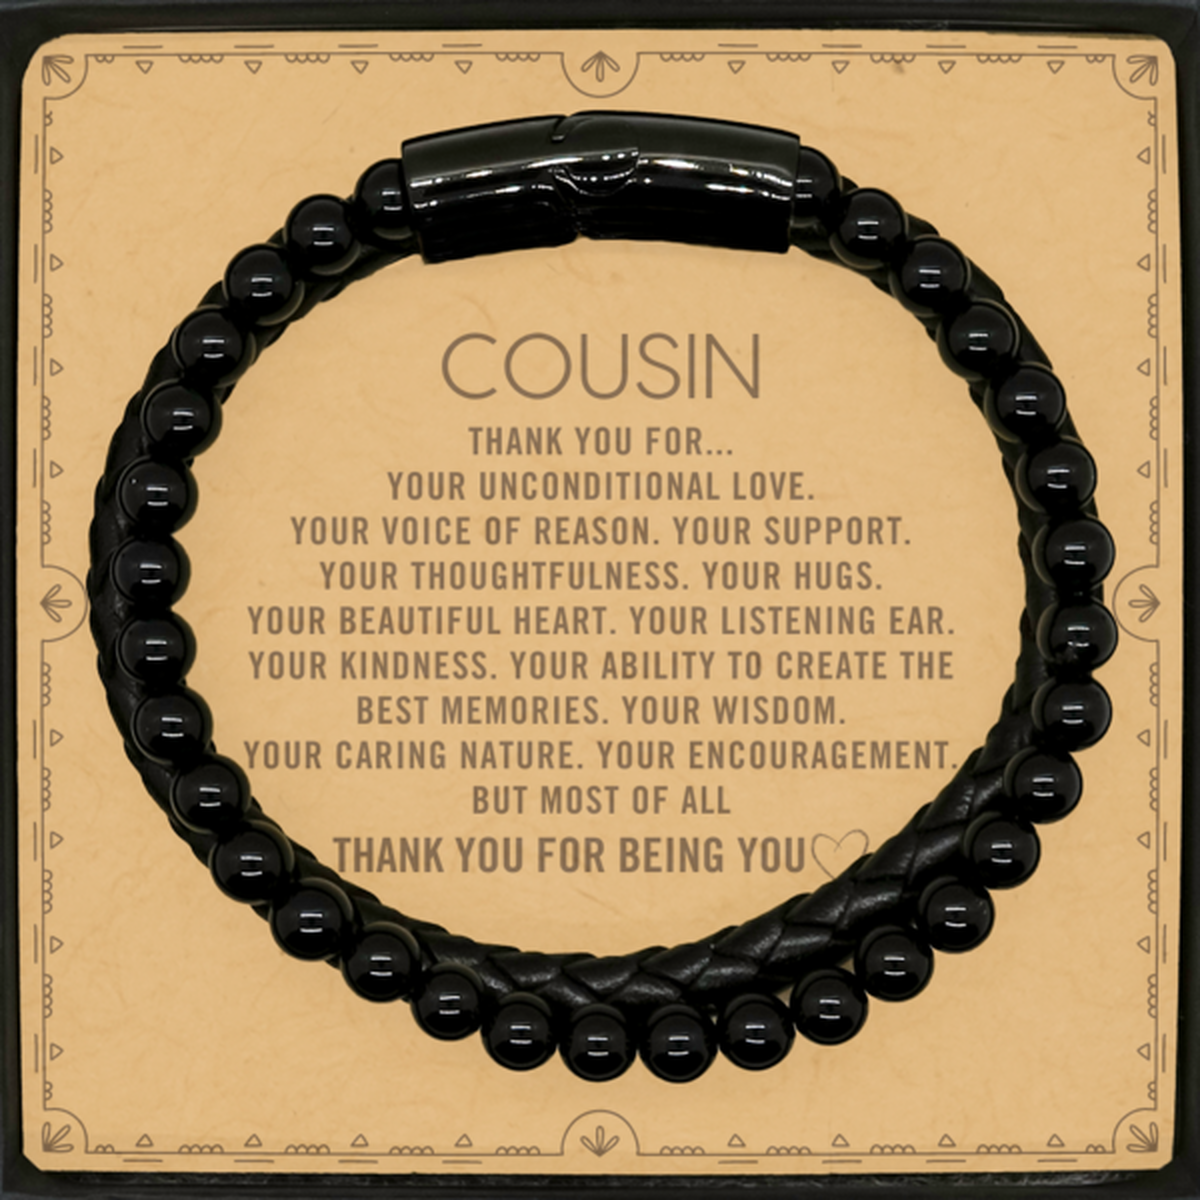 Cousin Stone Leather Bracelets Custom, Message Card Gifts For Cousin Christmas Graduation Birthday Gifts for Men Women Cousin Thank you for Your unconditional love